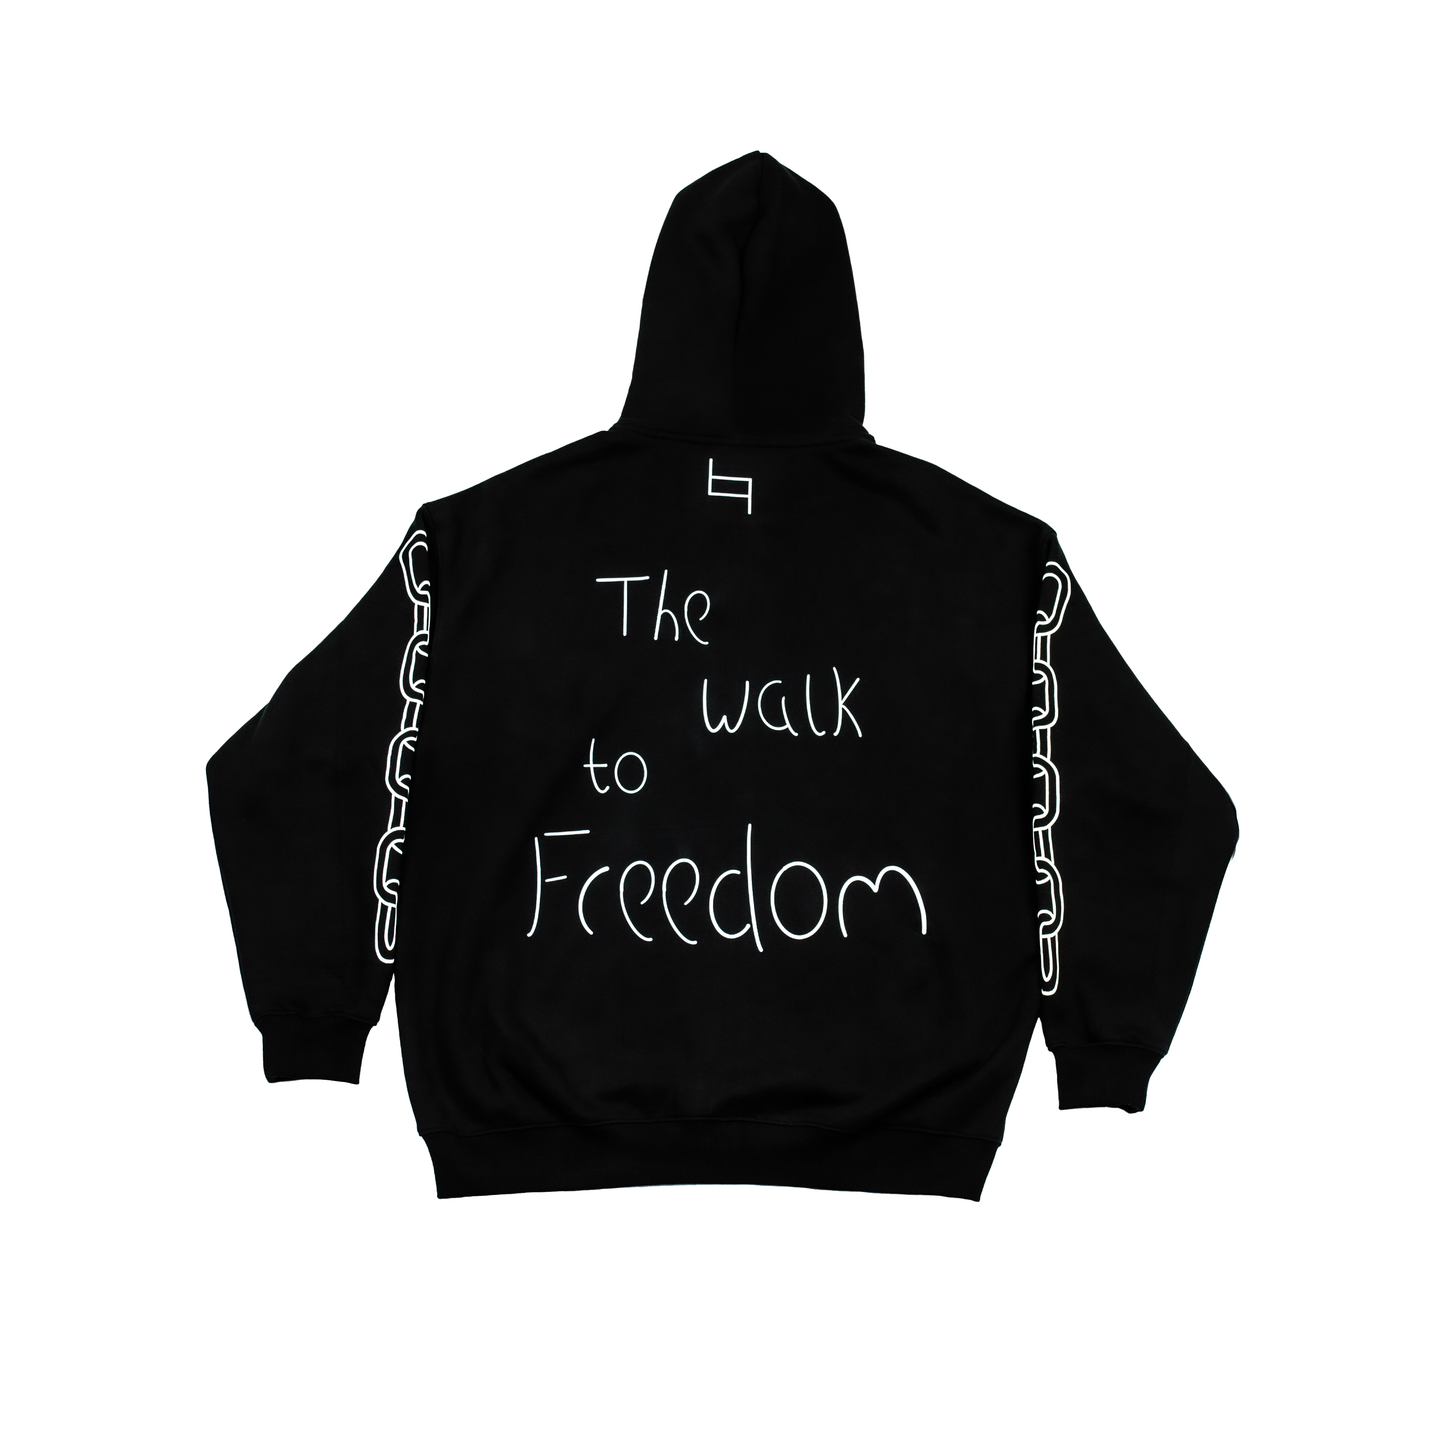 THE WALK TO FREEDOM ZIP-UP